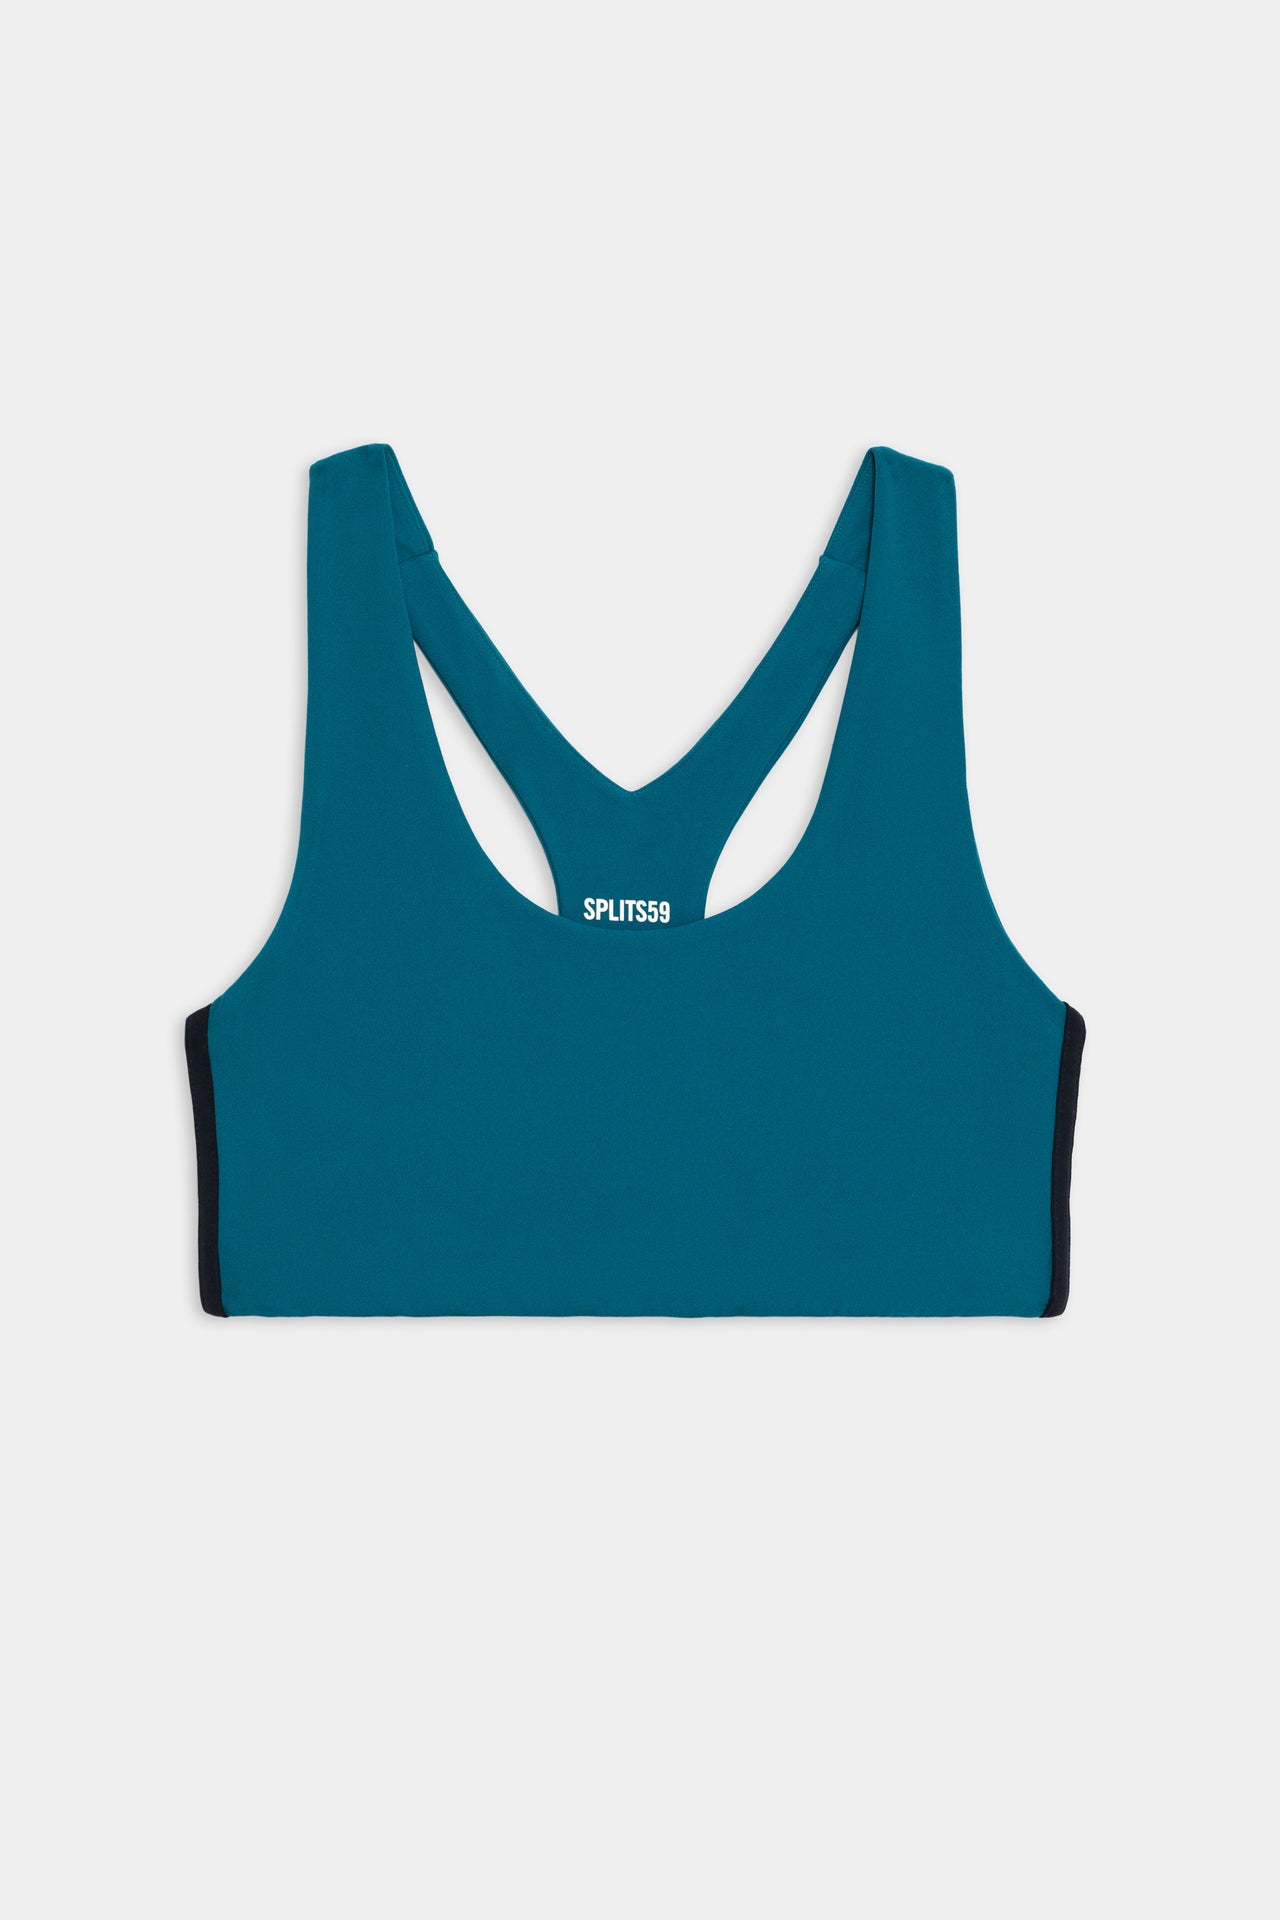 Flat view of greenish blue sports bra with two thin black stripes down the side